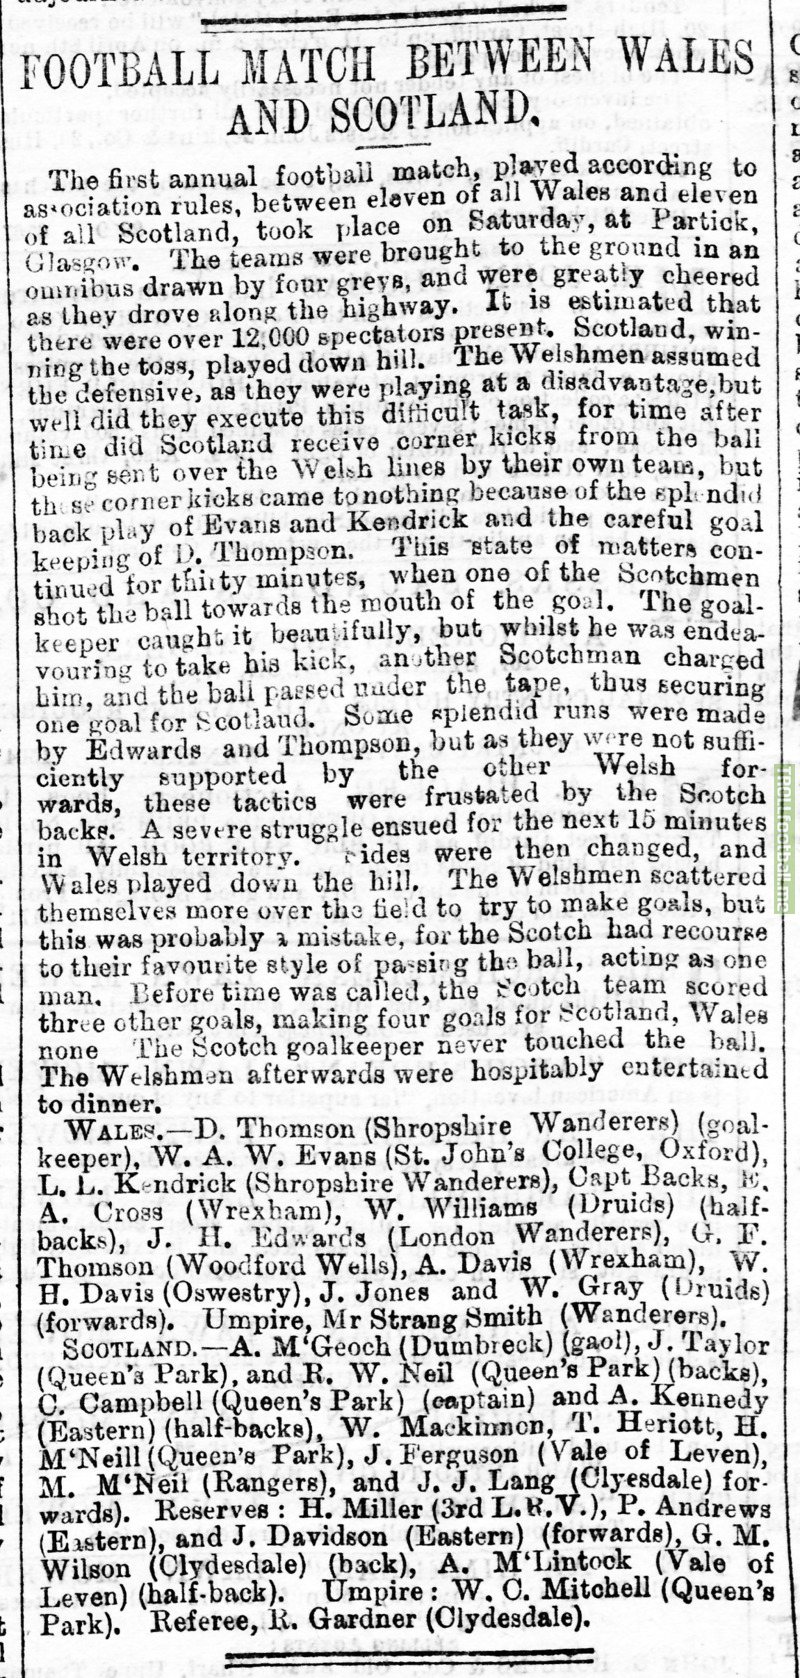 OTD in 1876 Wales played its first-ever competitive match, a 4-0 loss to Scotland. With this match, the Dragons became the third oldest international football team after England and Scotland.